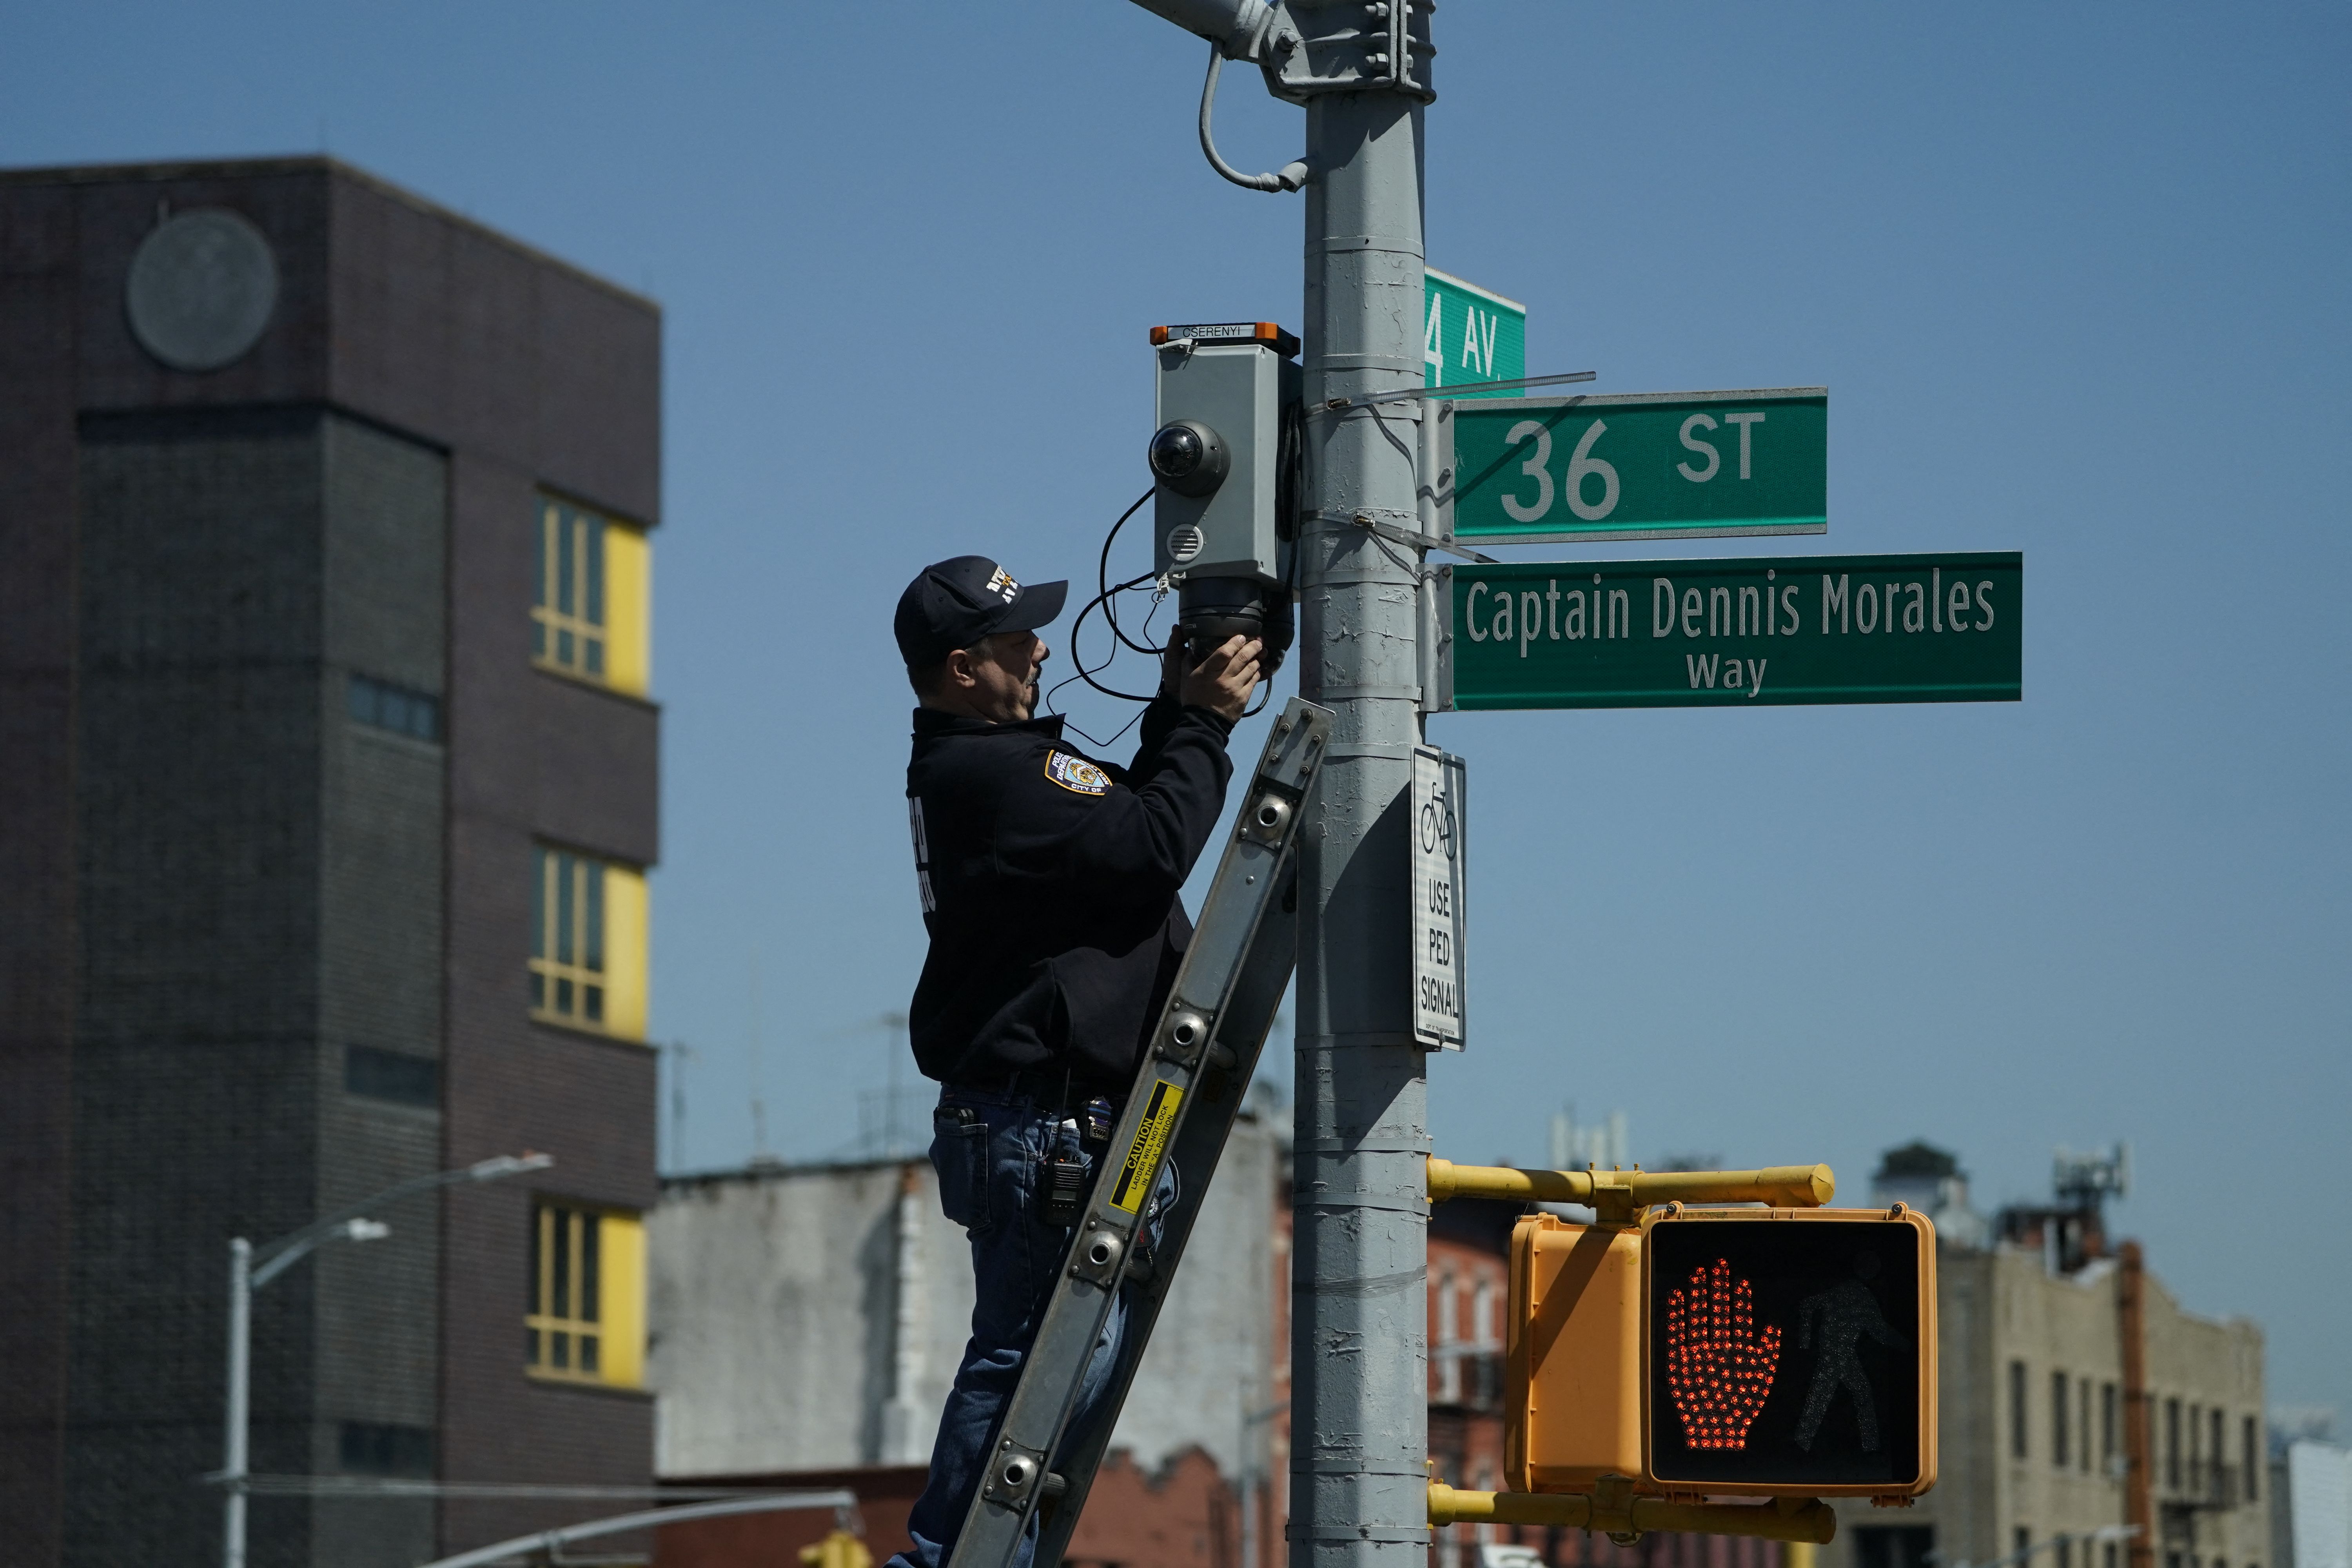 A member of the New York City Police Department climbs a ladder to retrieve a security camera near the subway station shooting in Brooklyn on Tuesday.